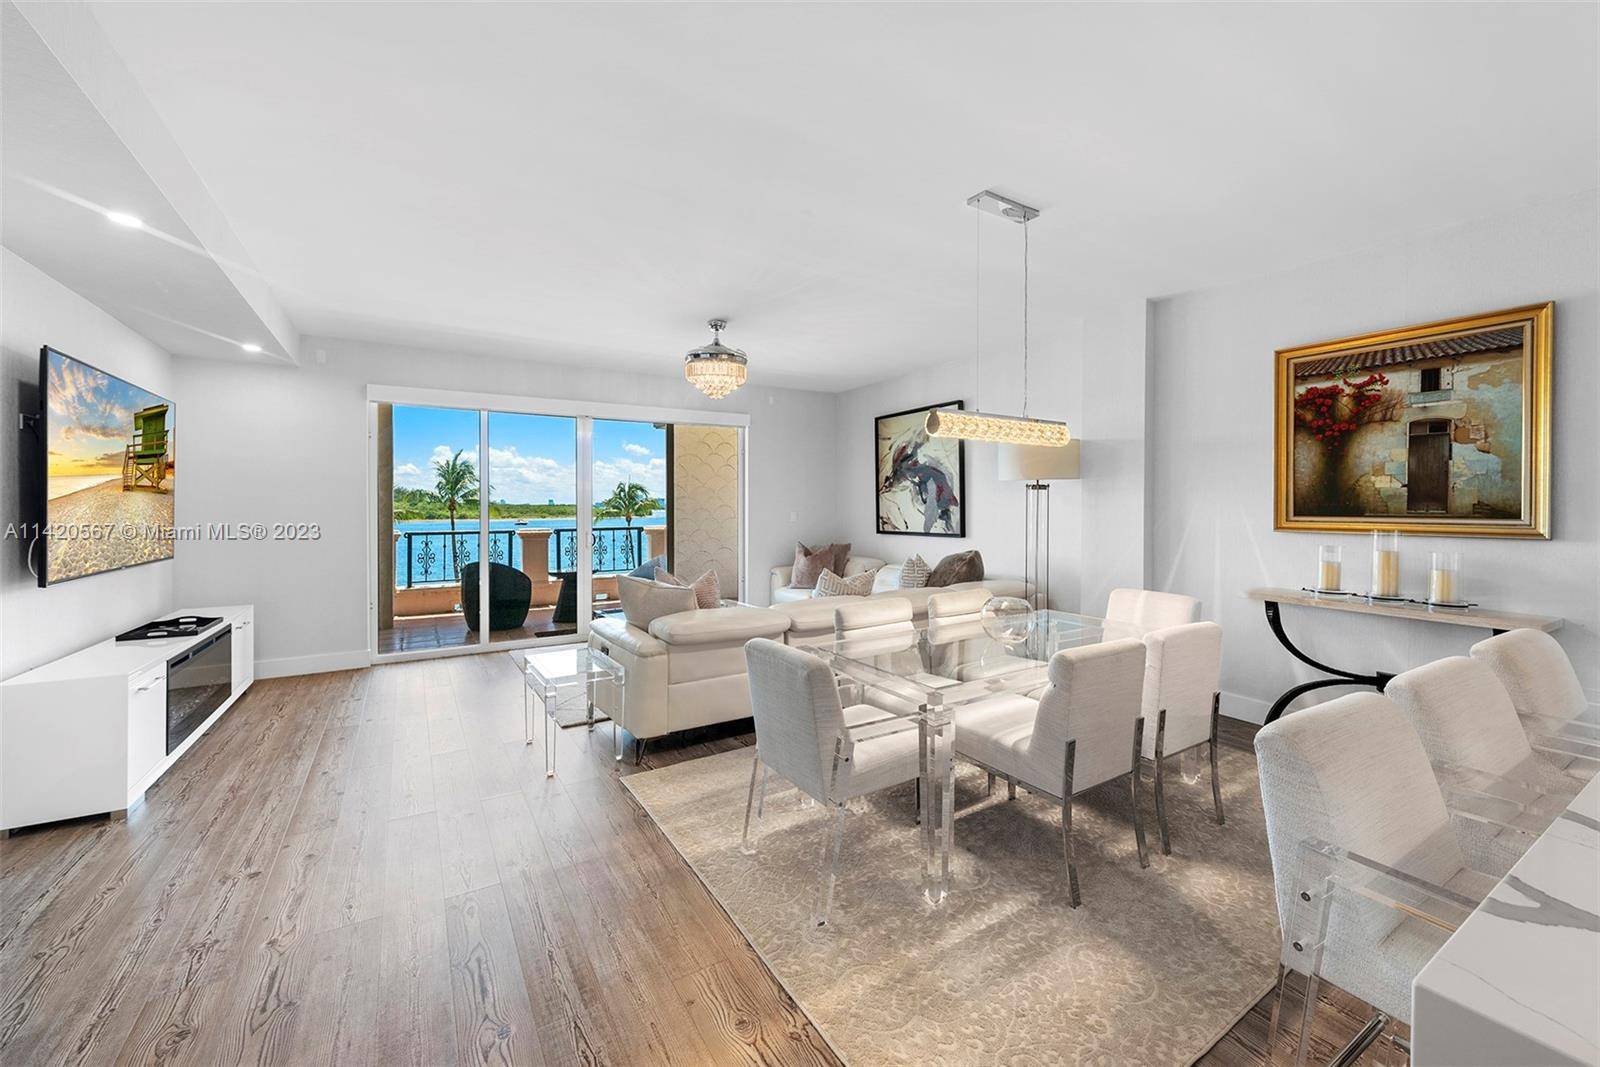 EXPERIENCE FISHER ISLAND LIVING AT ITS FINEST IN THIS SPECTACULAR BAYSIDE VILLAGE 3RD FLOOR UNIT.